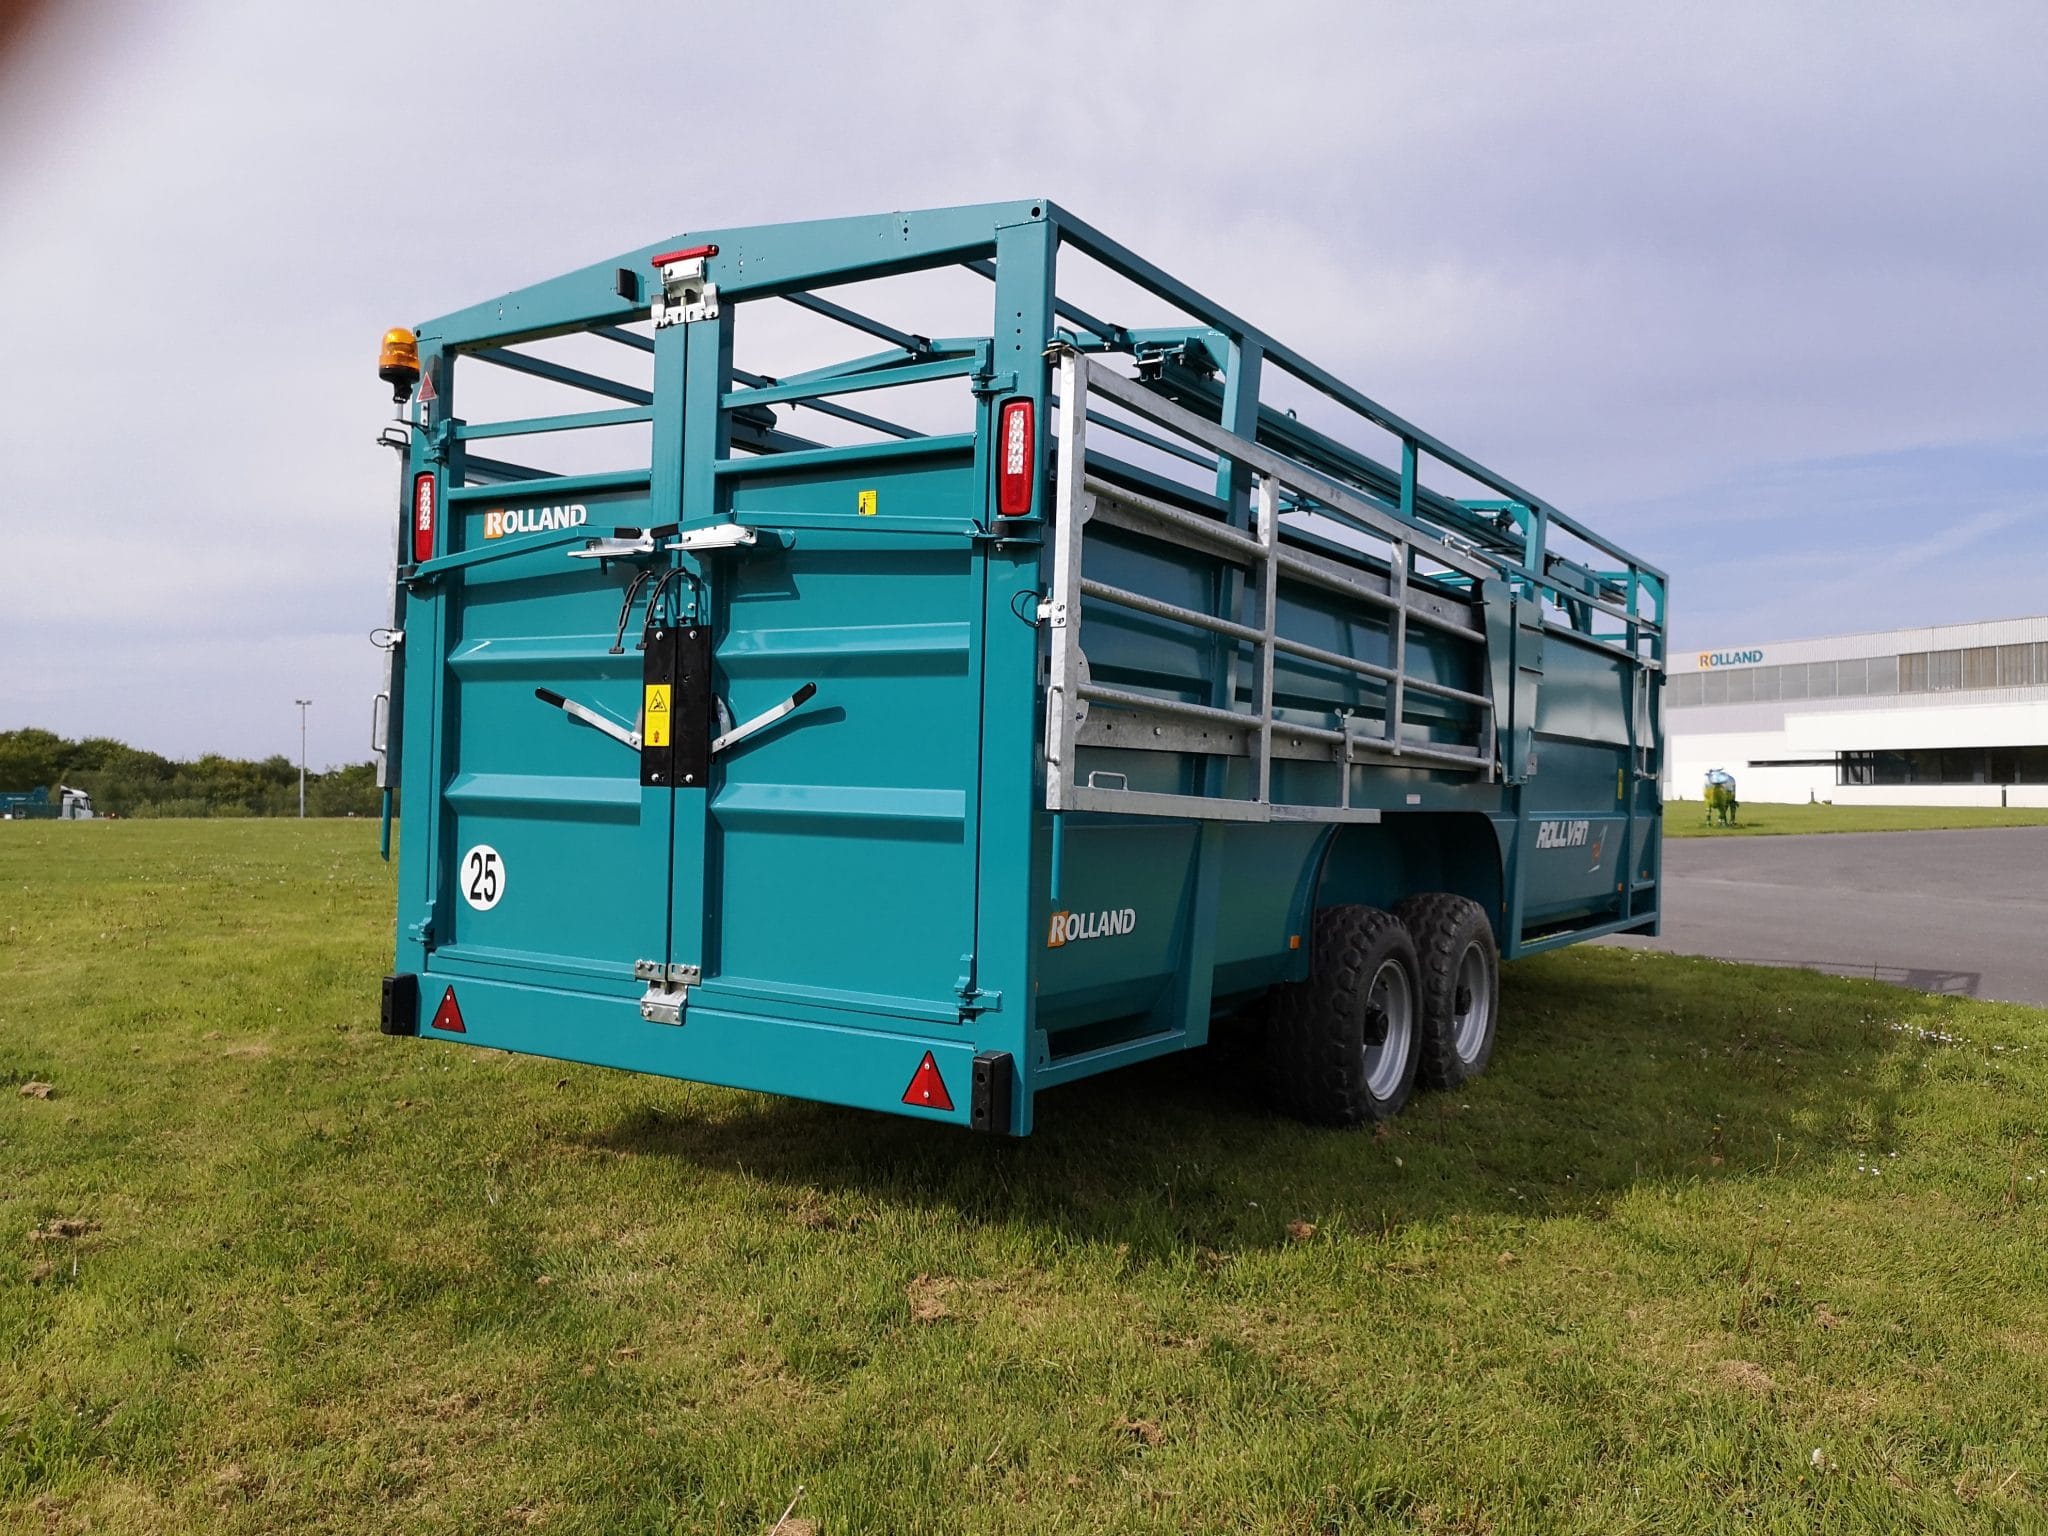 Cattle trailers